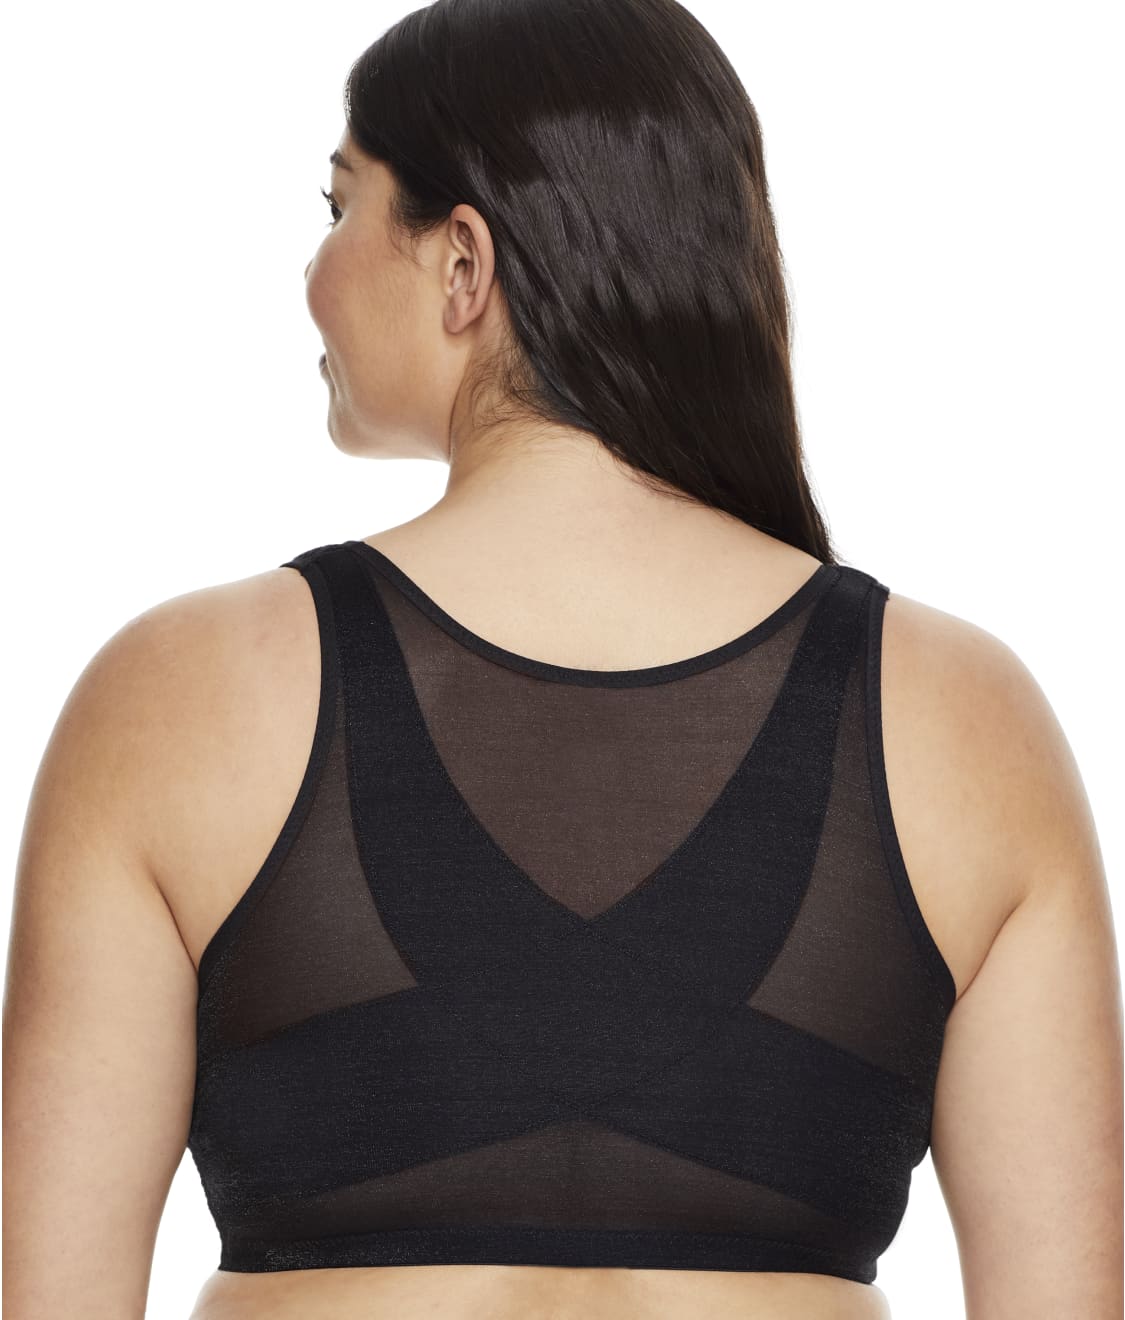 Leading Lady: Nora Posture Support Front-Close Bra 5530